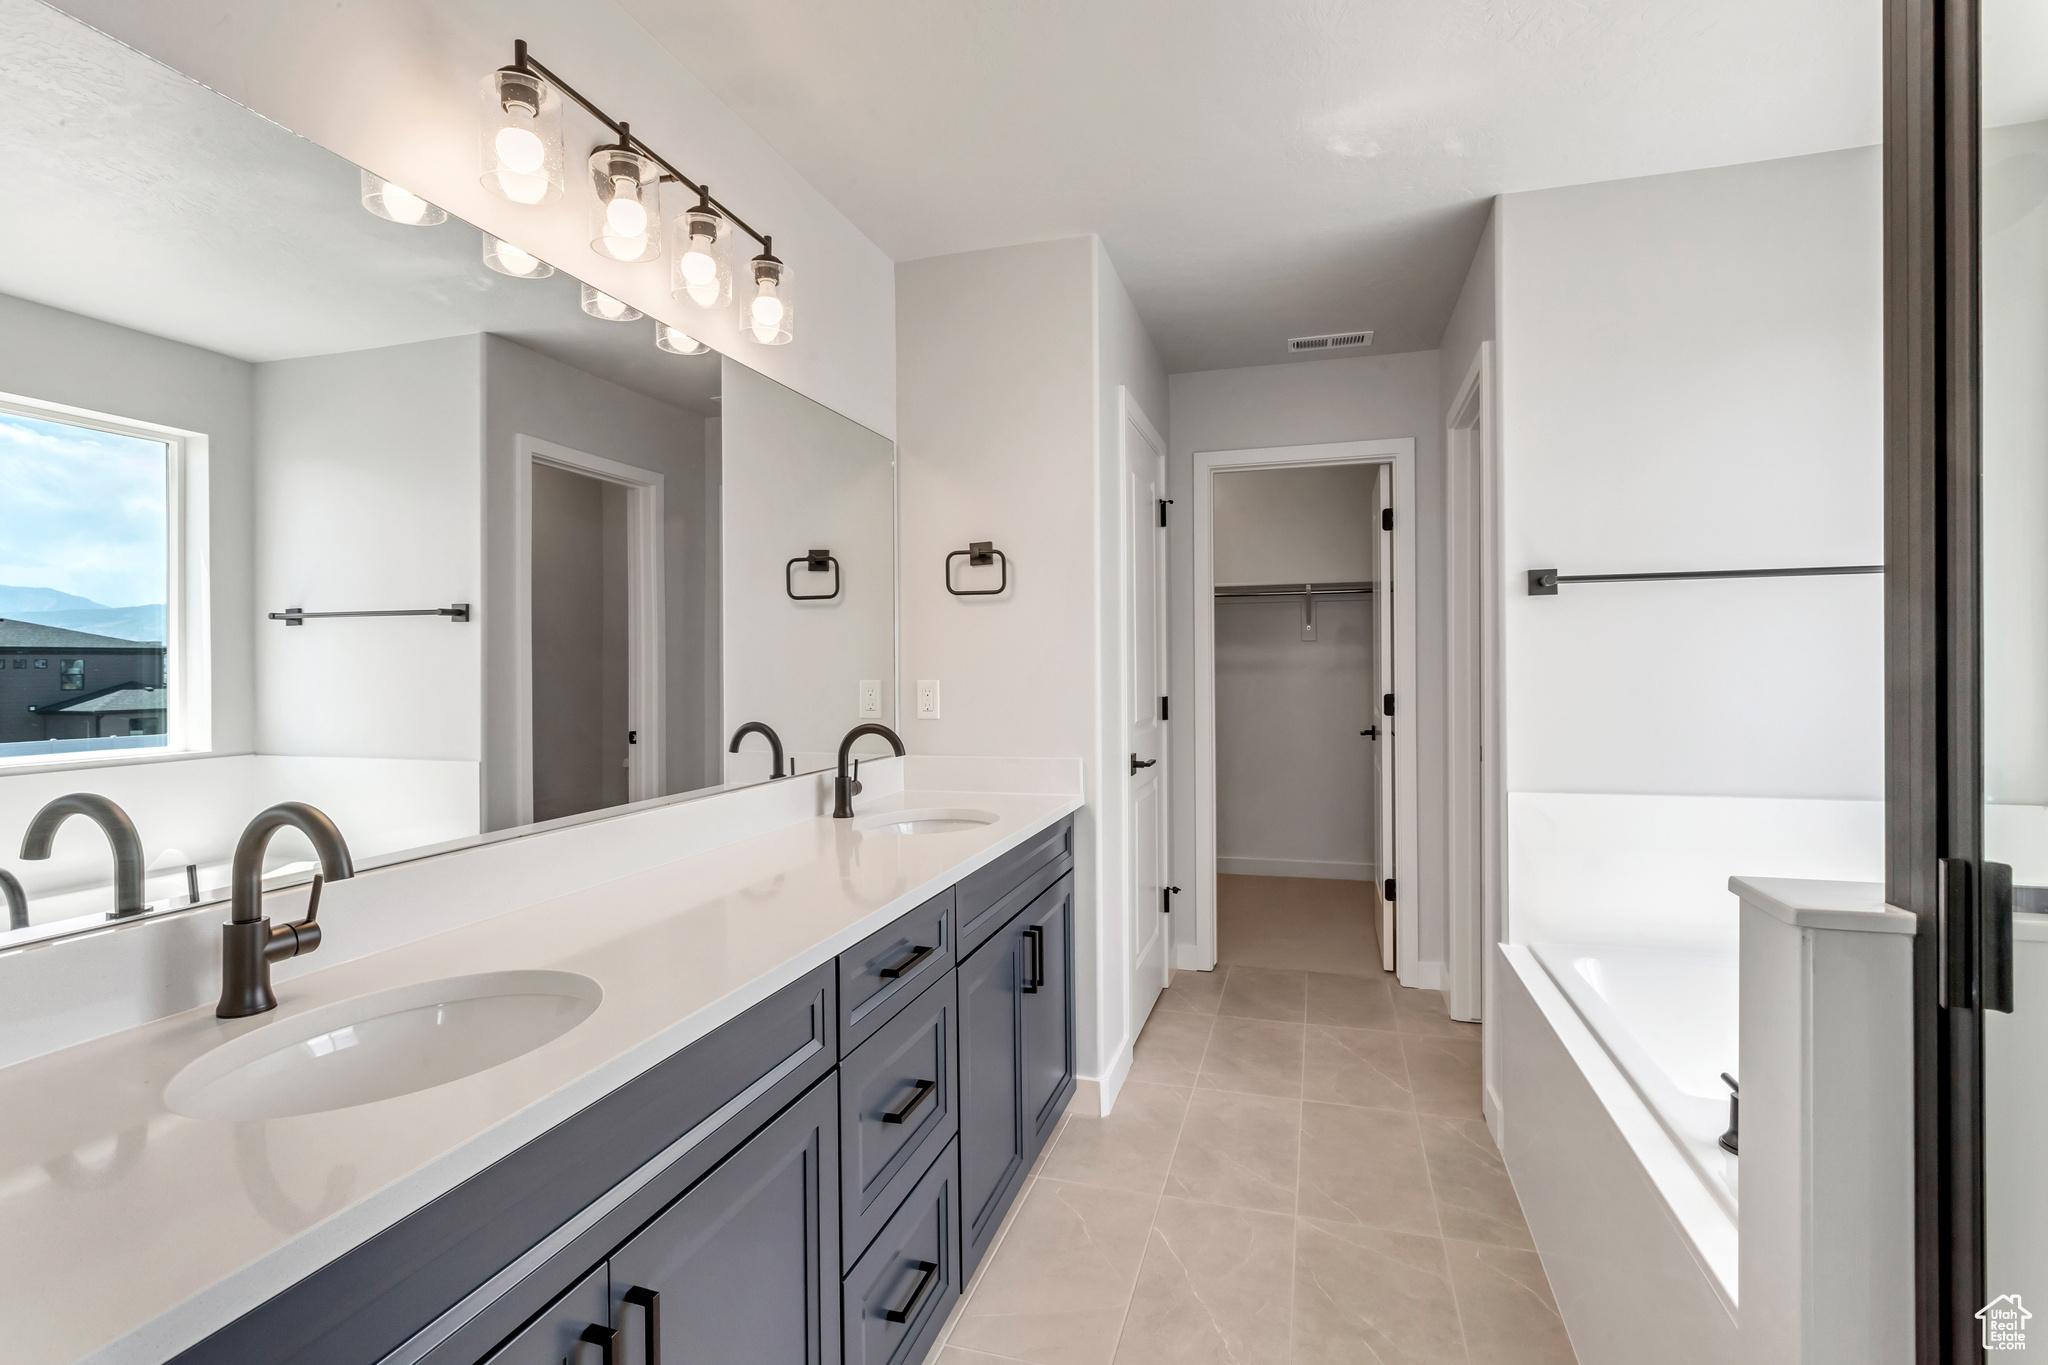 PHOTOS FROM A SIMILAR HOME. COLORS AND SELECTIONS WILL VARY.  Primary Suite Bathroom featuring tile flooring, a tub, vanity with extensive cabinet space, and dual sinks